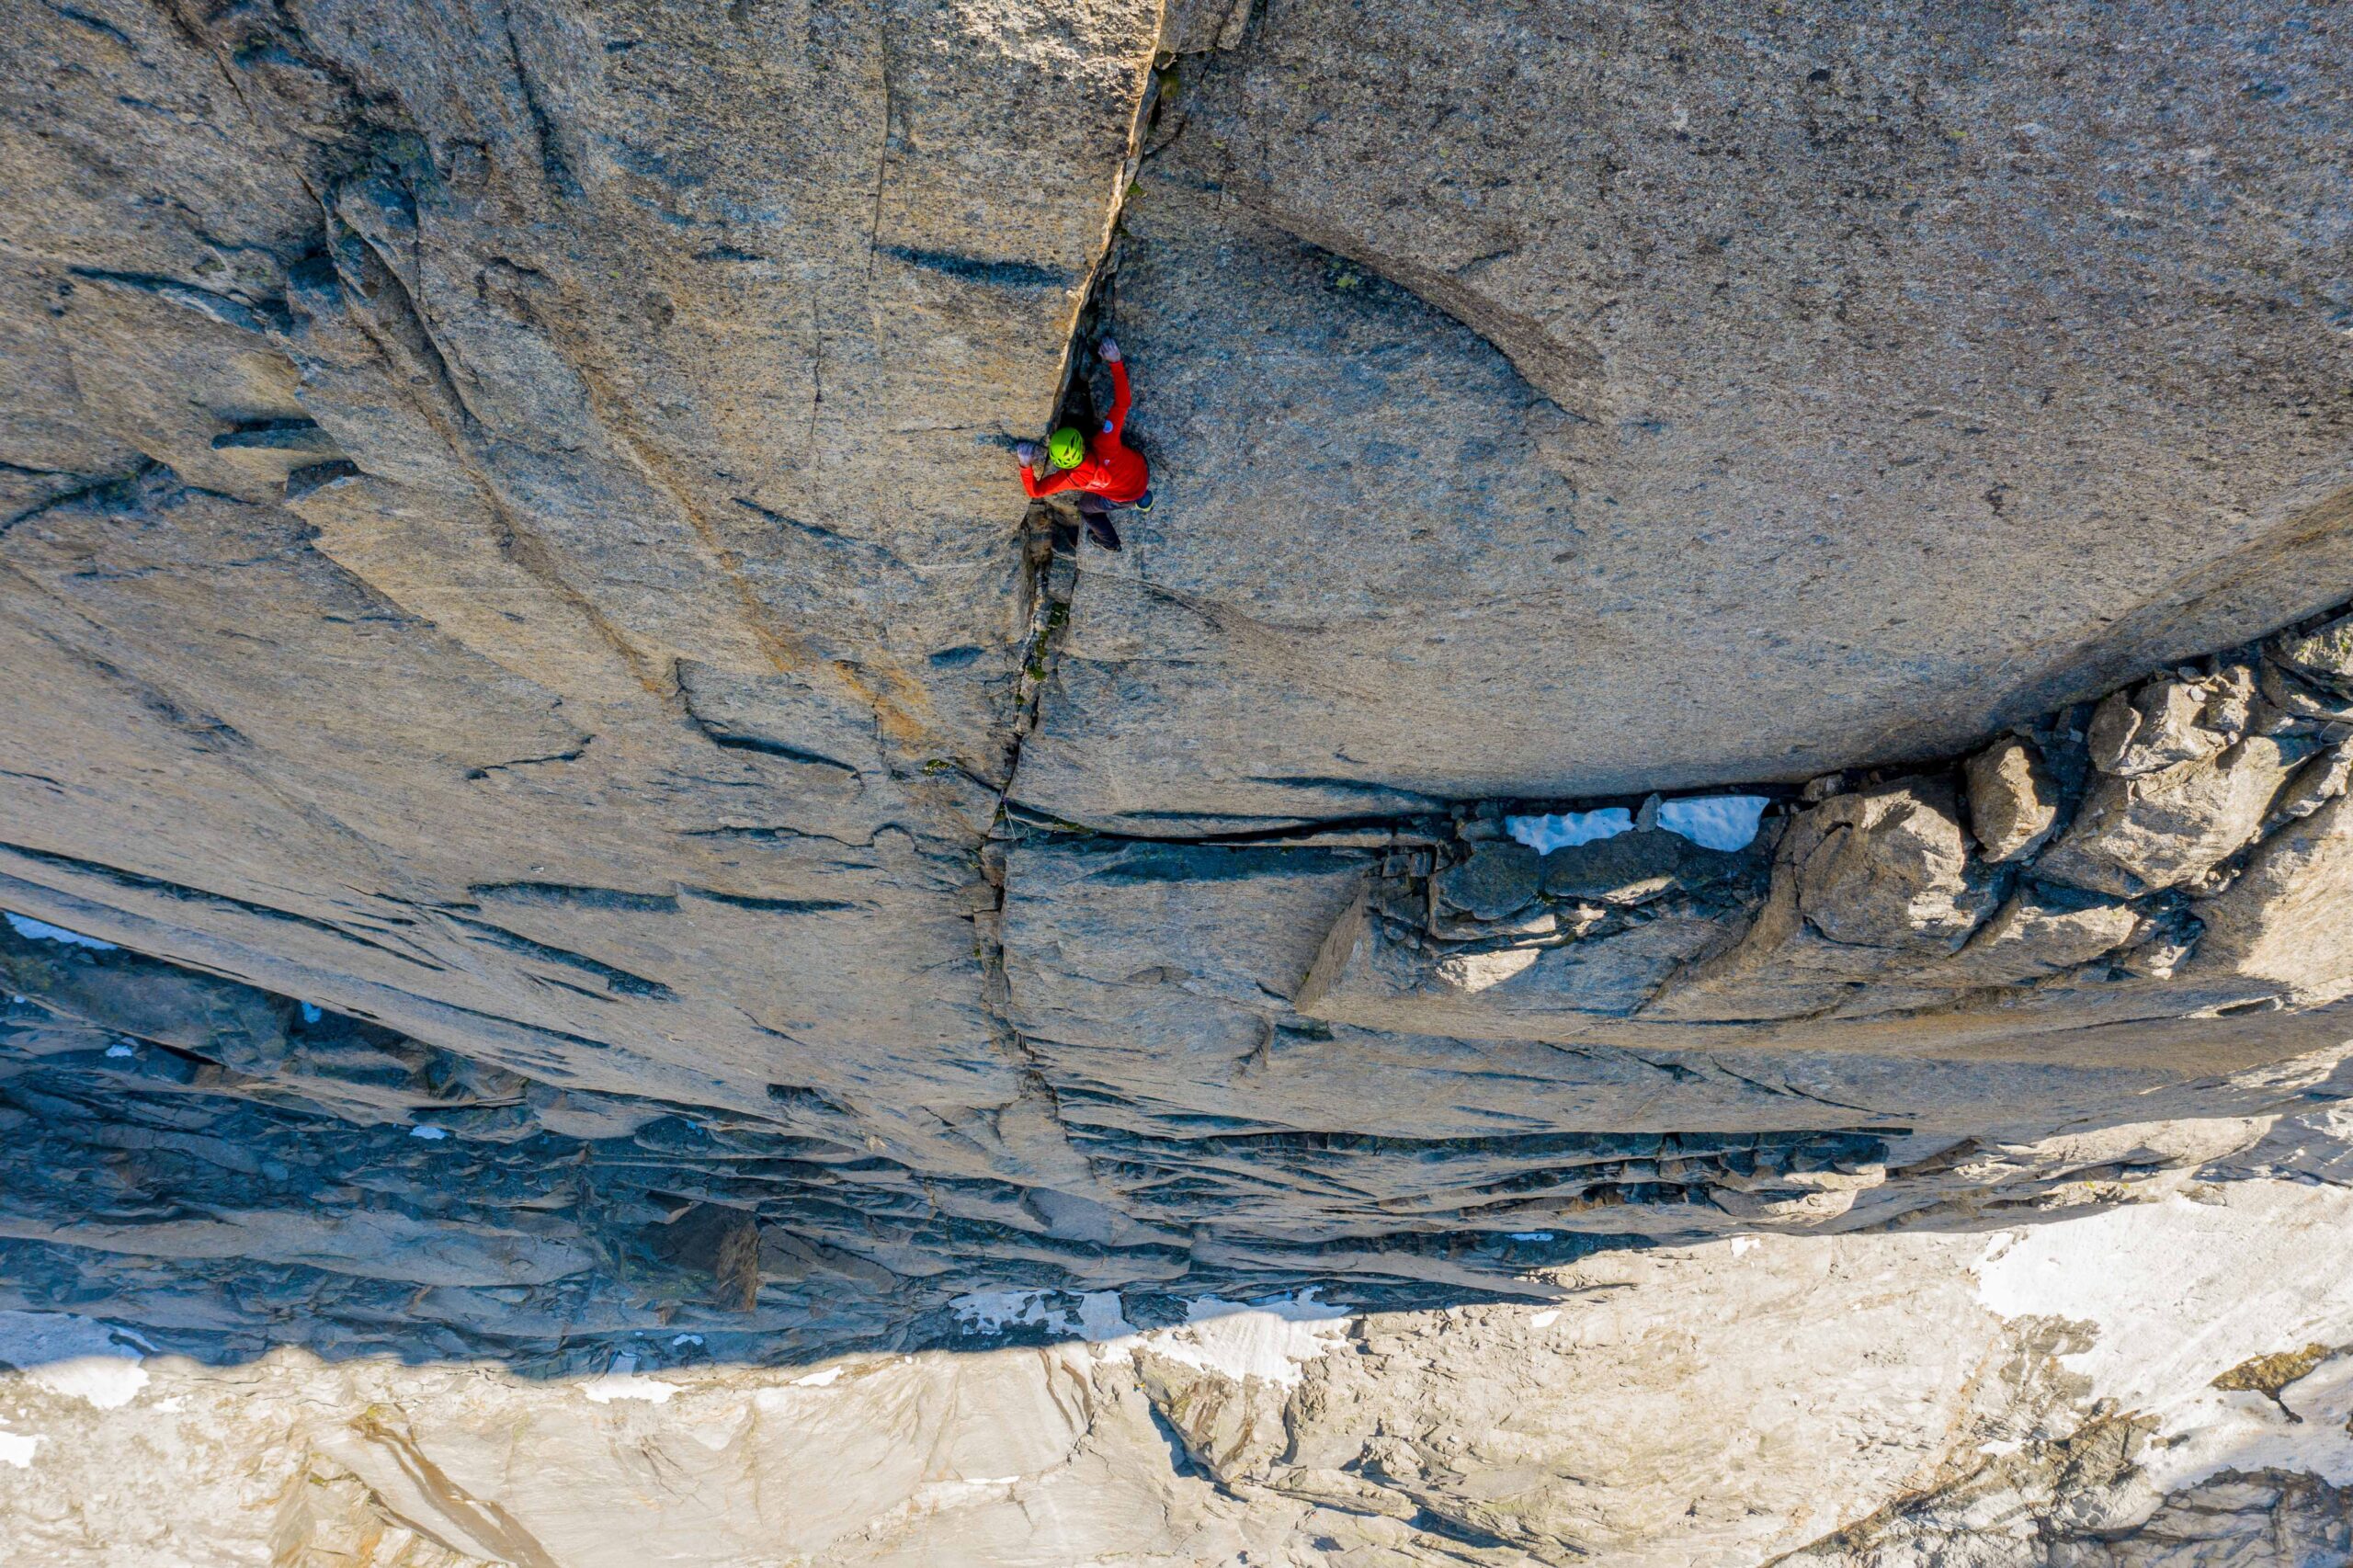 a sheer rock face, hundreds of metres tall, is shot from above as a small climber, free climbs the rock face